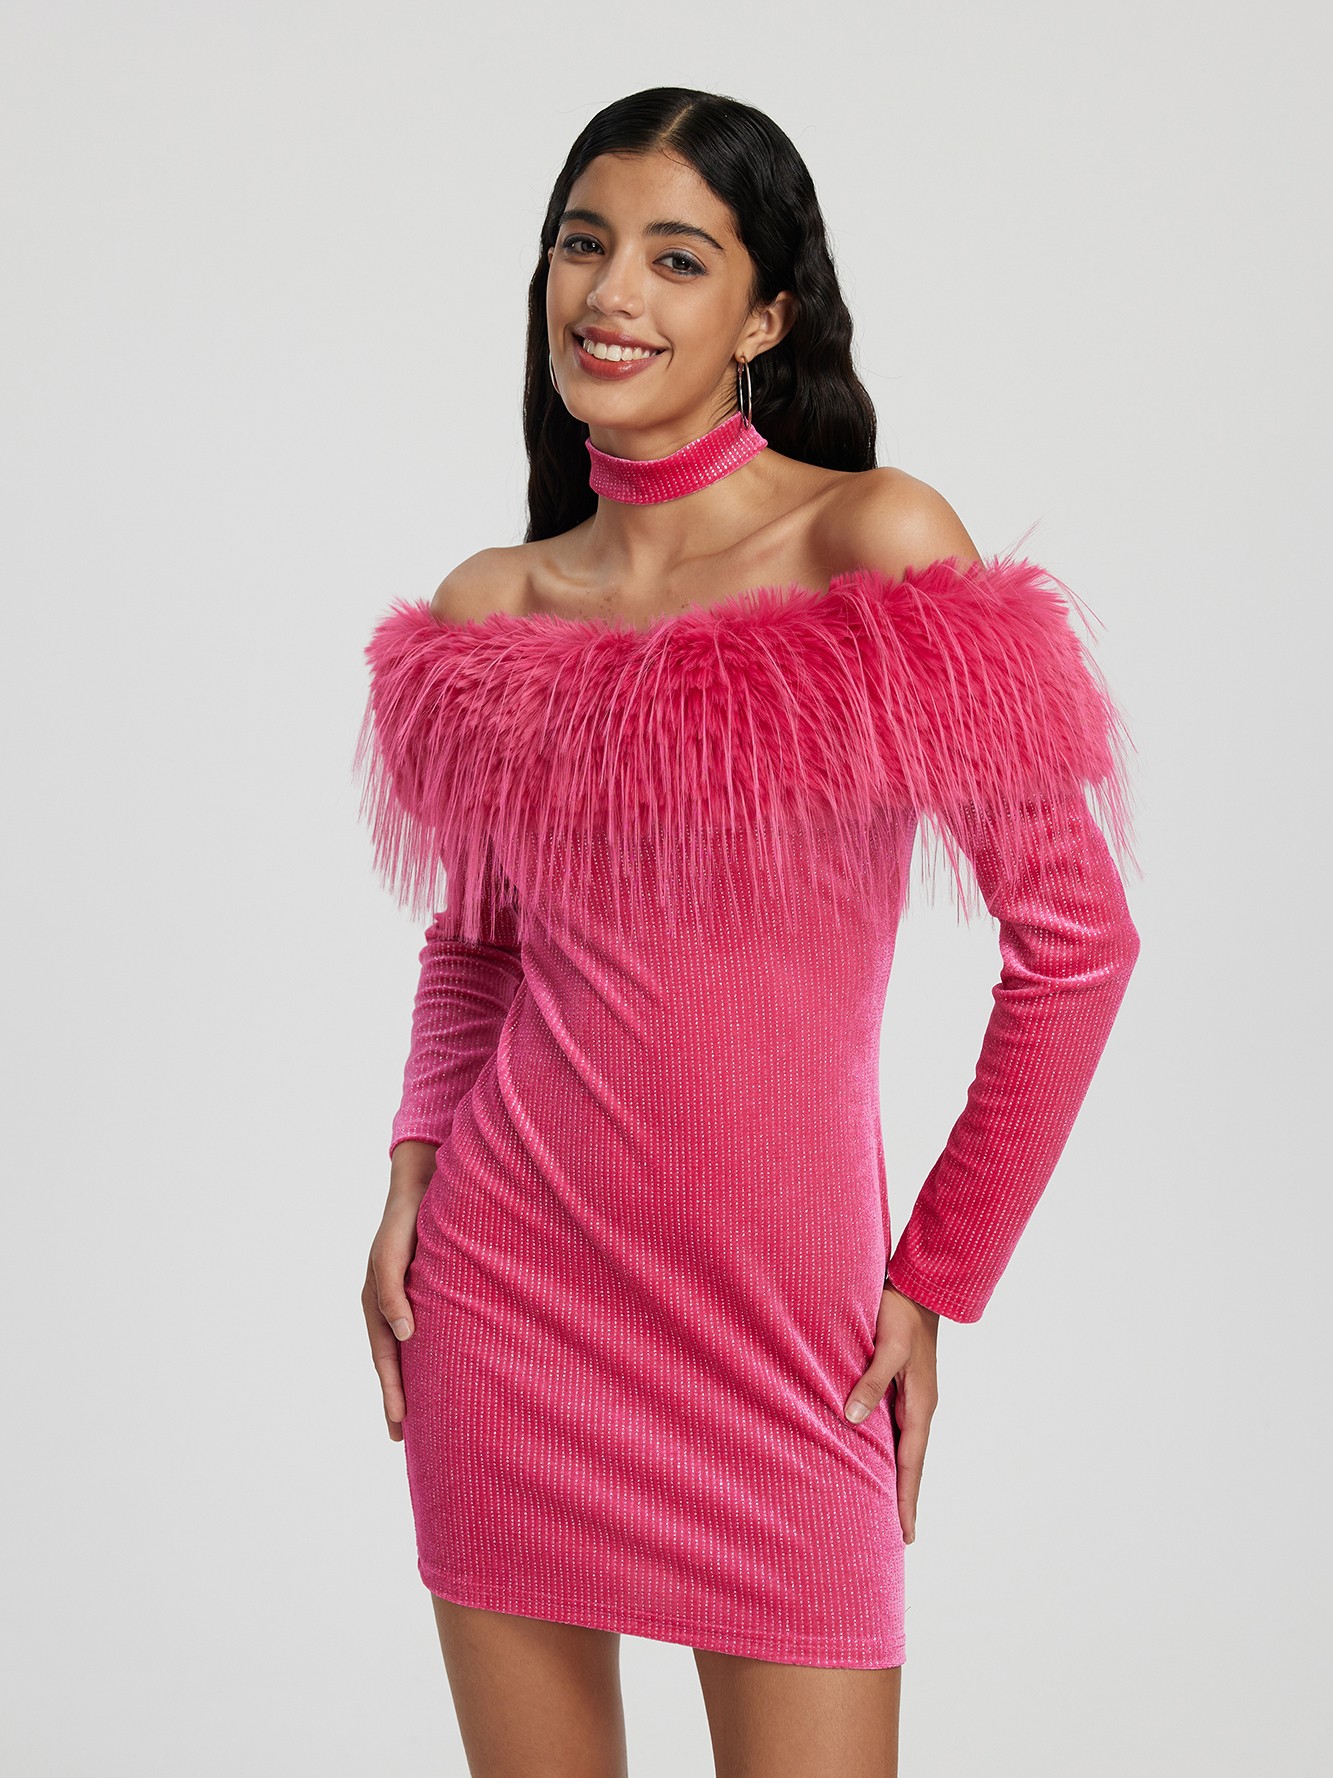 Feather cocktail dress by Urbanic London Available ✓ Delivery 🚚 all over  Nepal 🇳🇵